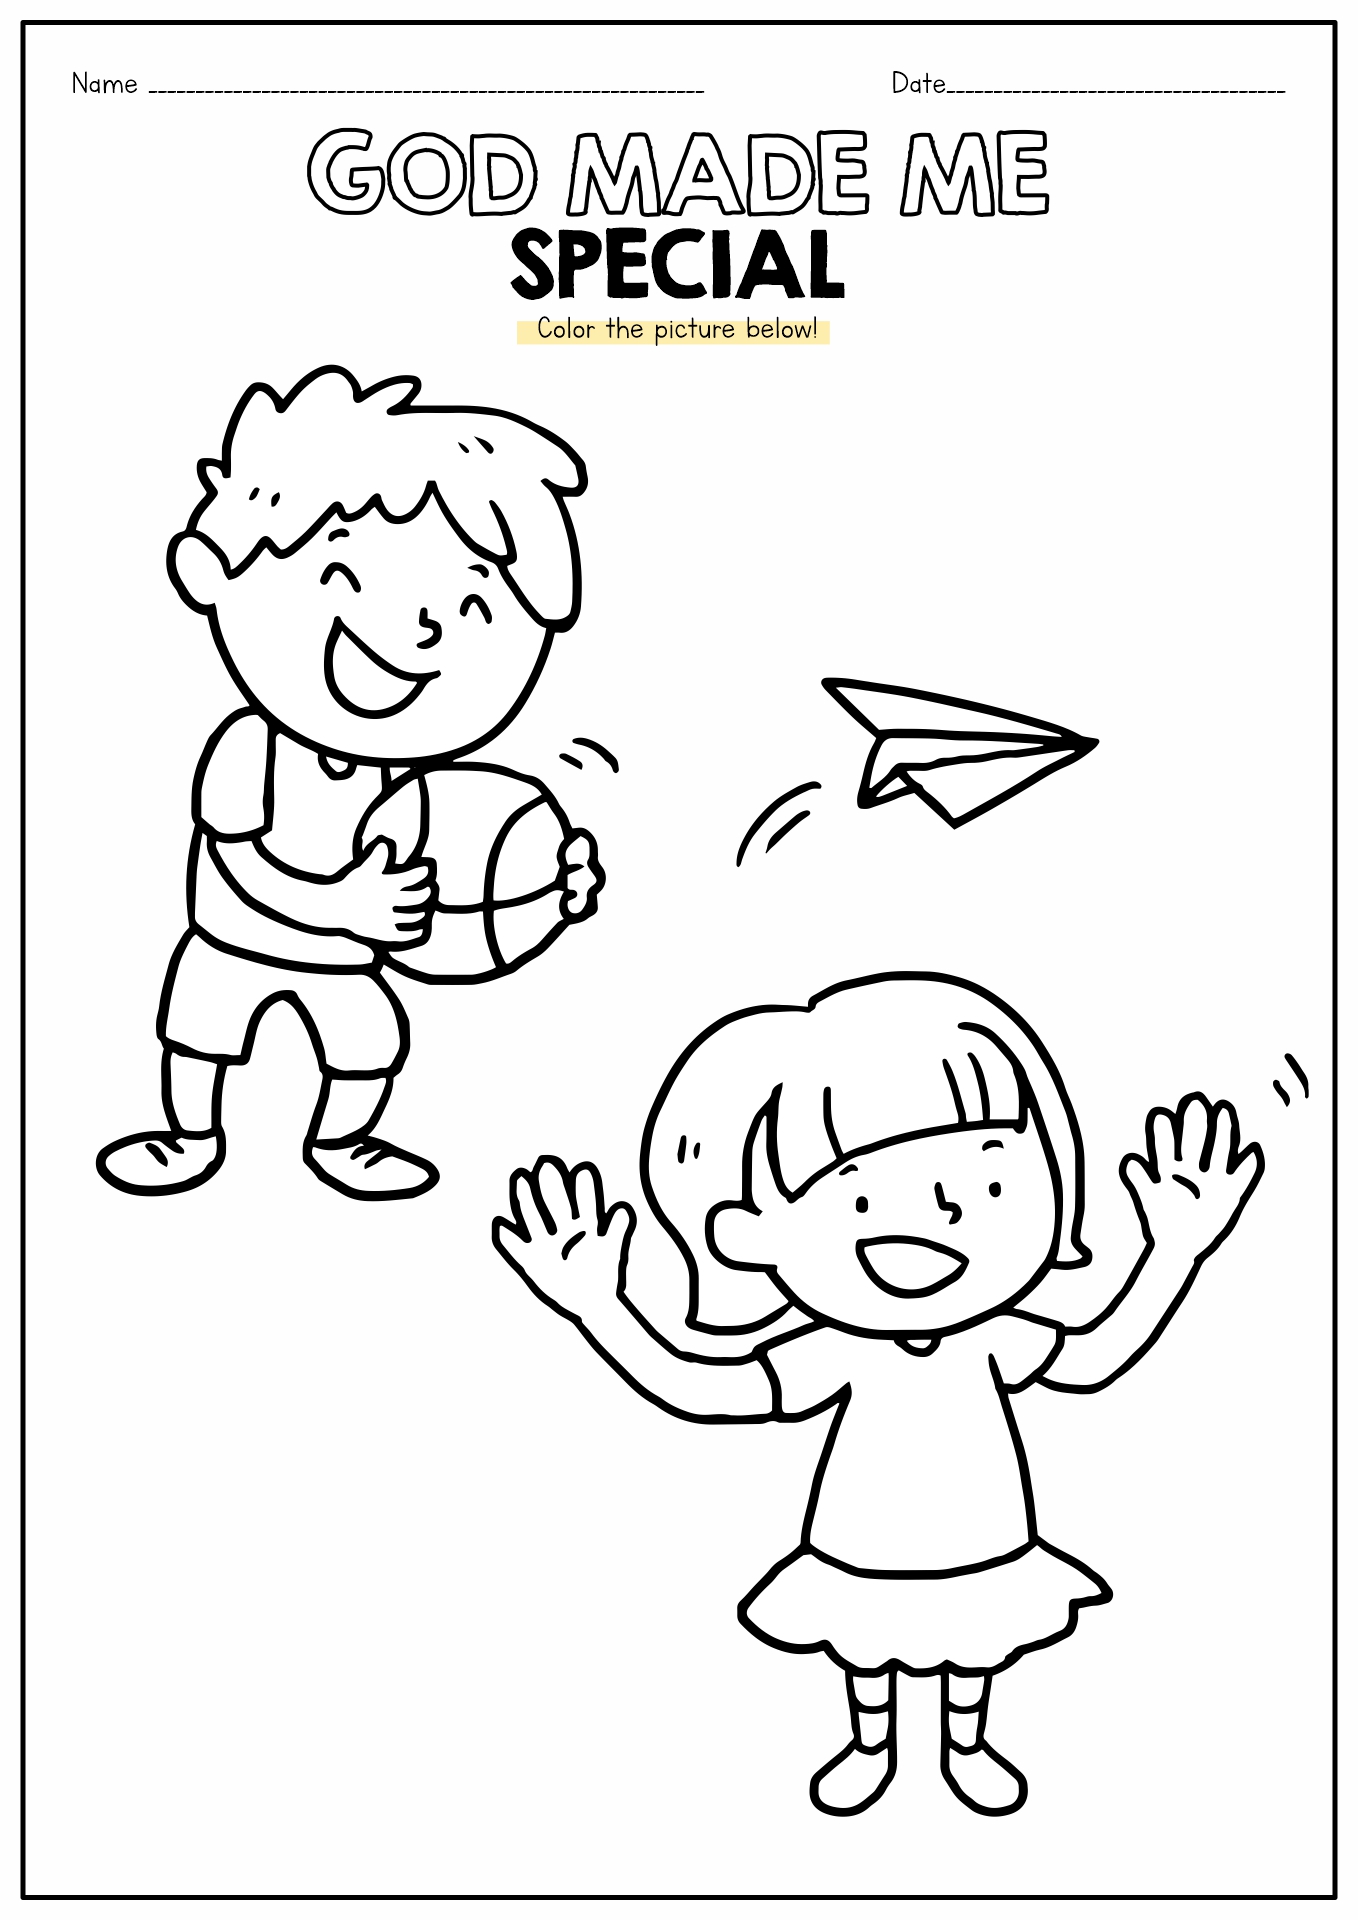 God Made Me Coloring Pages for Preschool